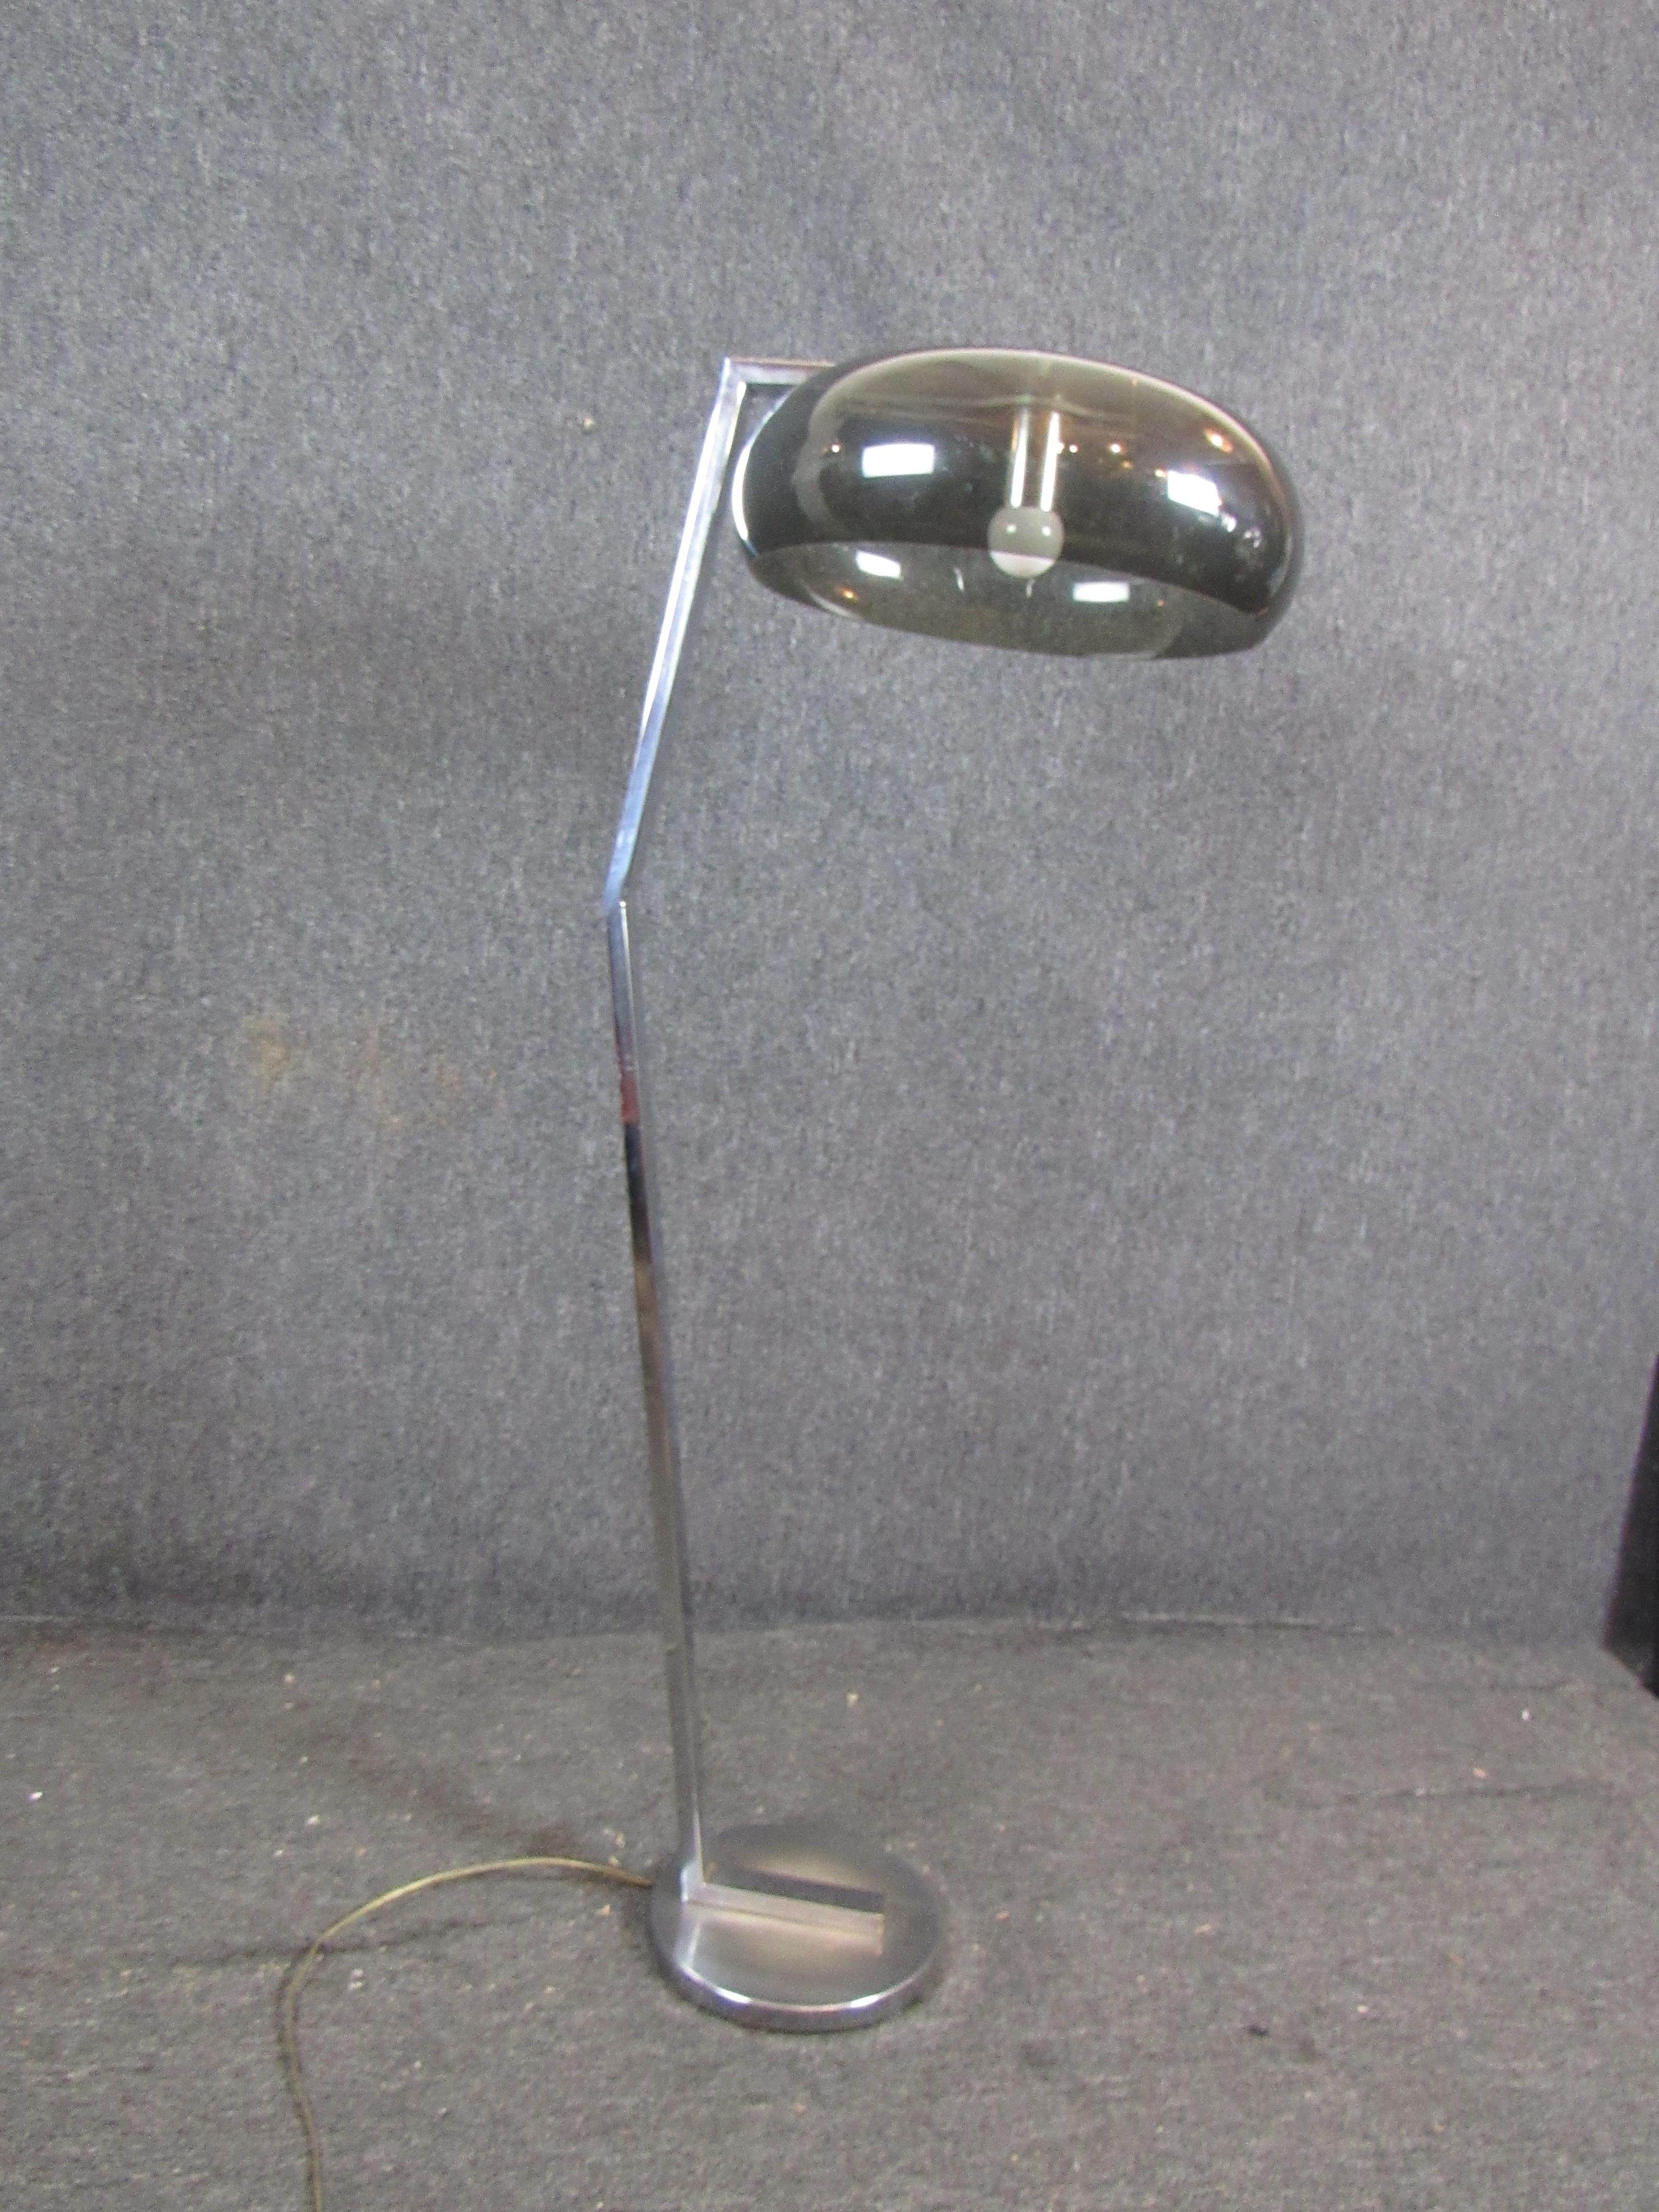 Here is a wonderful vintage bent chrome floor lamp, ready to bring a touch of funky, bold style into any room! An 18